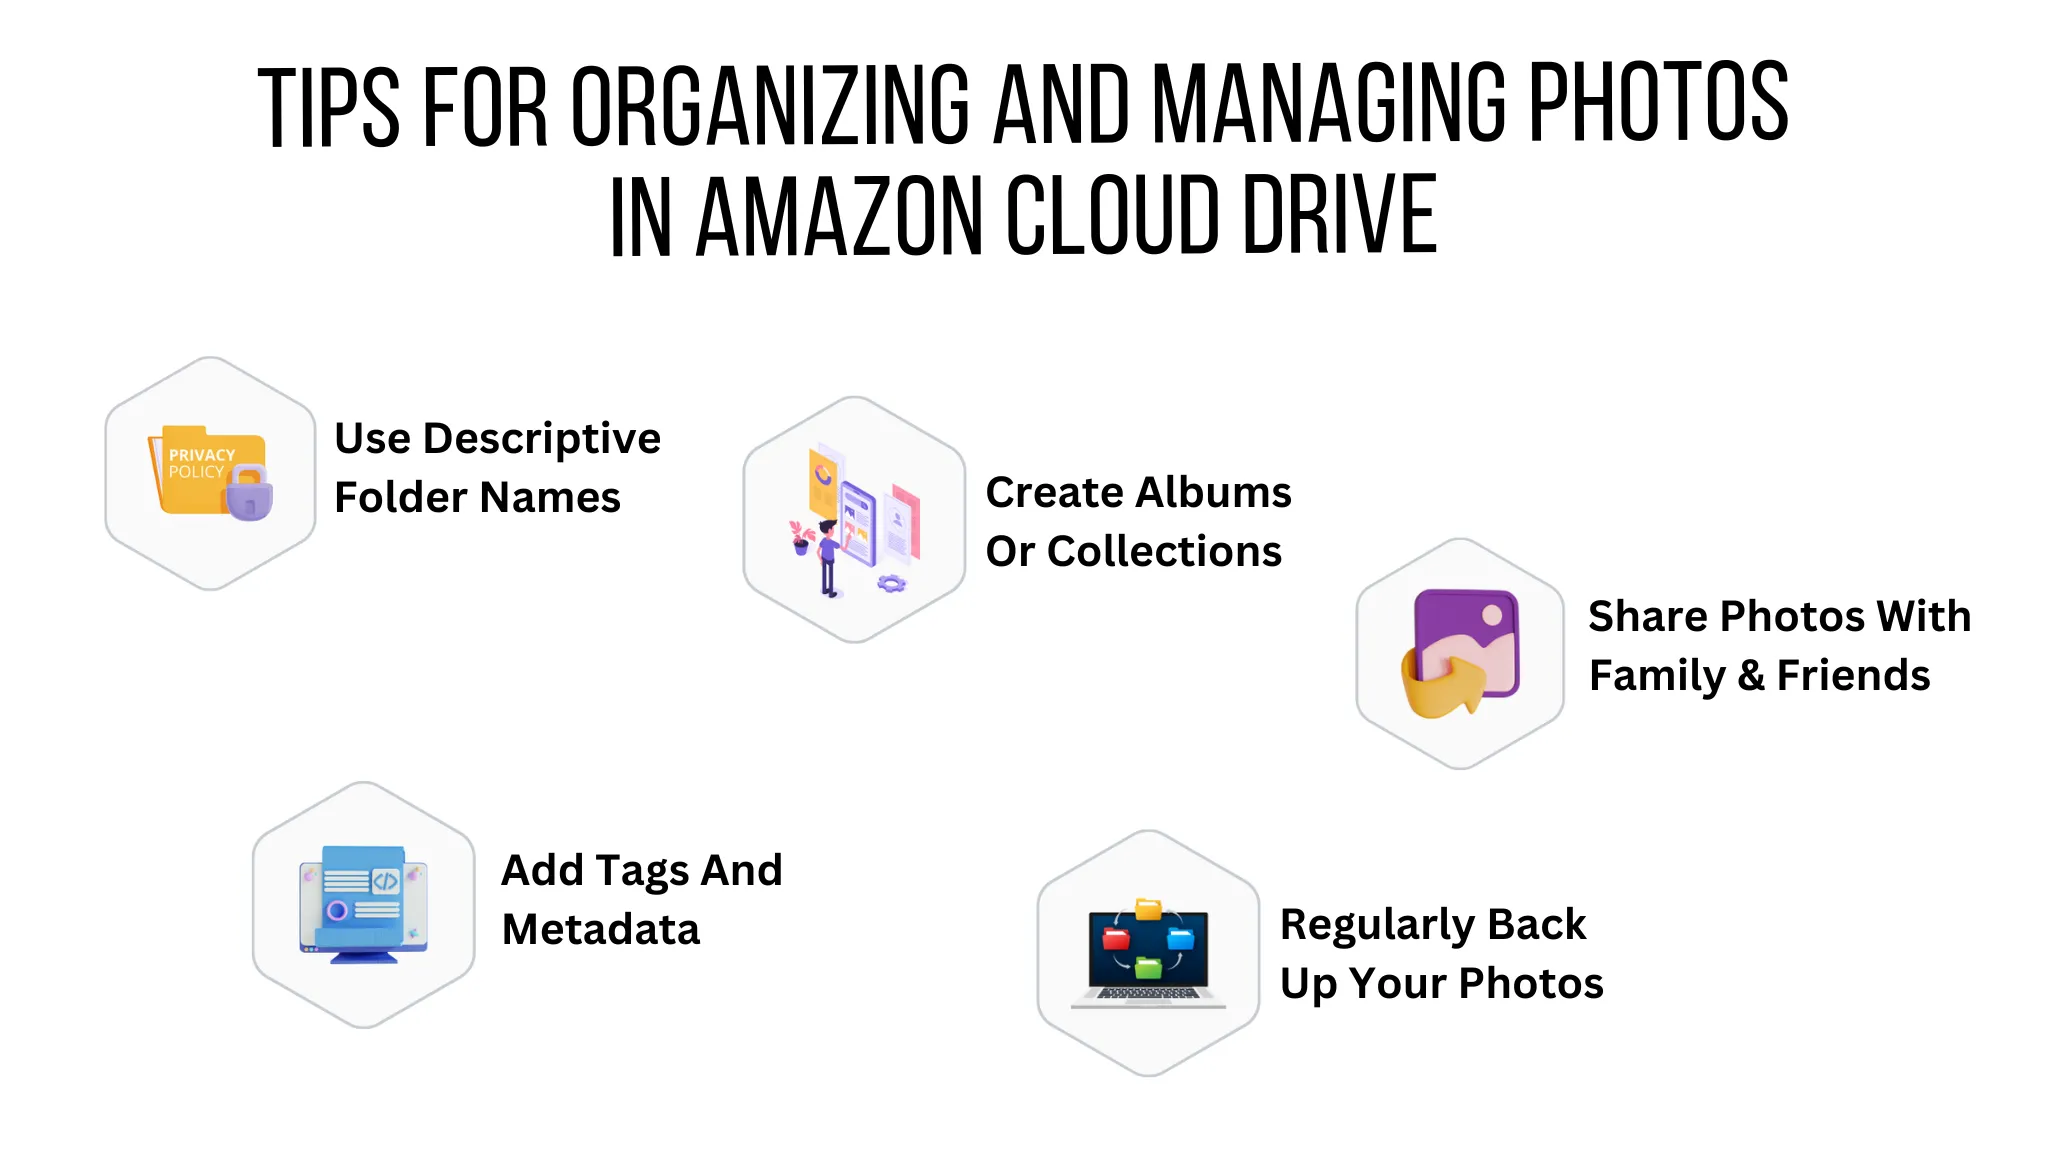 Tips for Organizing and Managing Photos in Amazon Cloud Drive